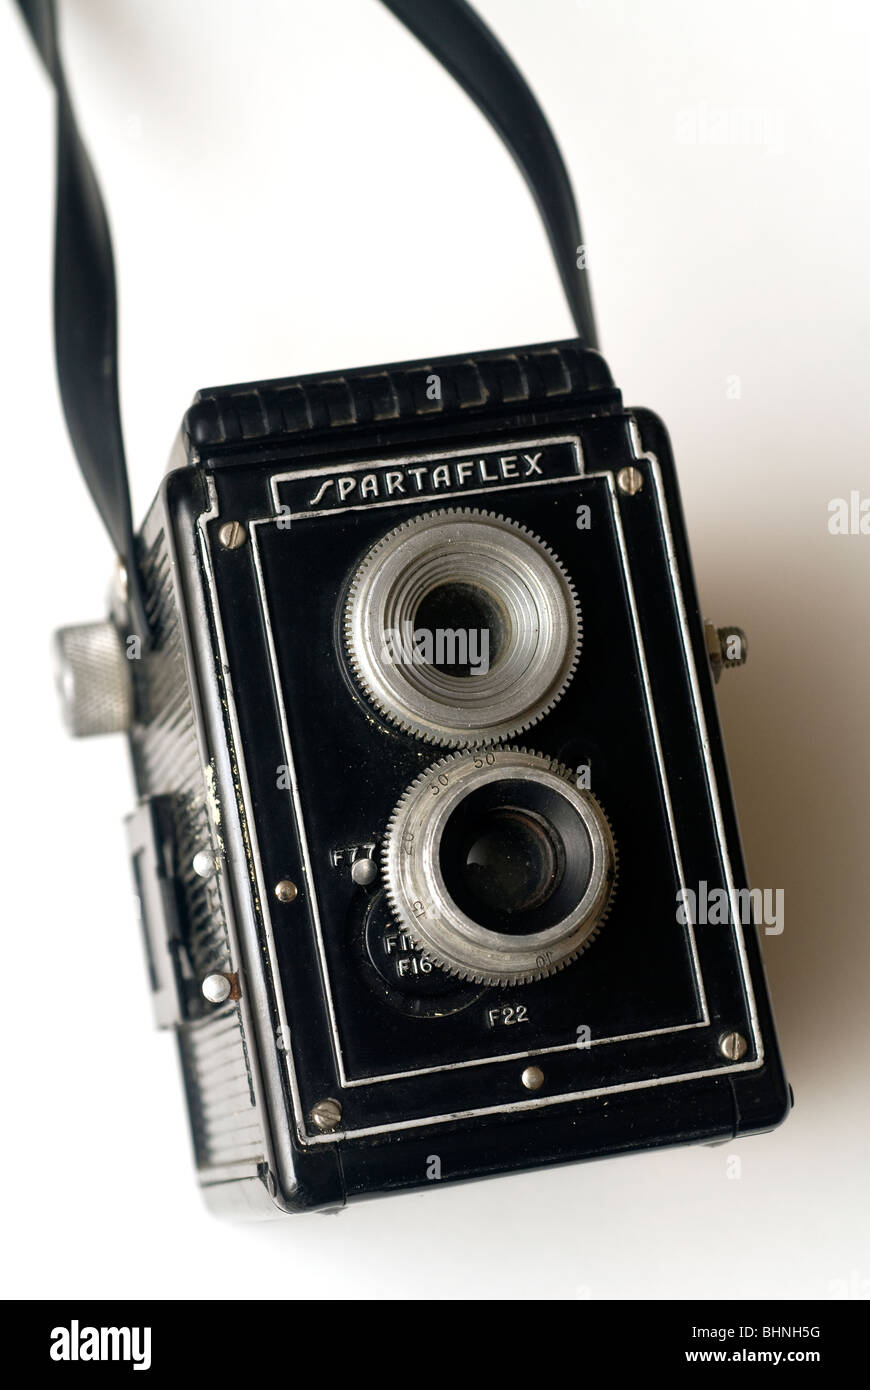 A Spartaflex twin-lens reflex camera dating from the 1950's. The camera uses still available 120 size film. Stock Photo